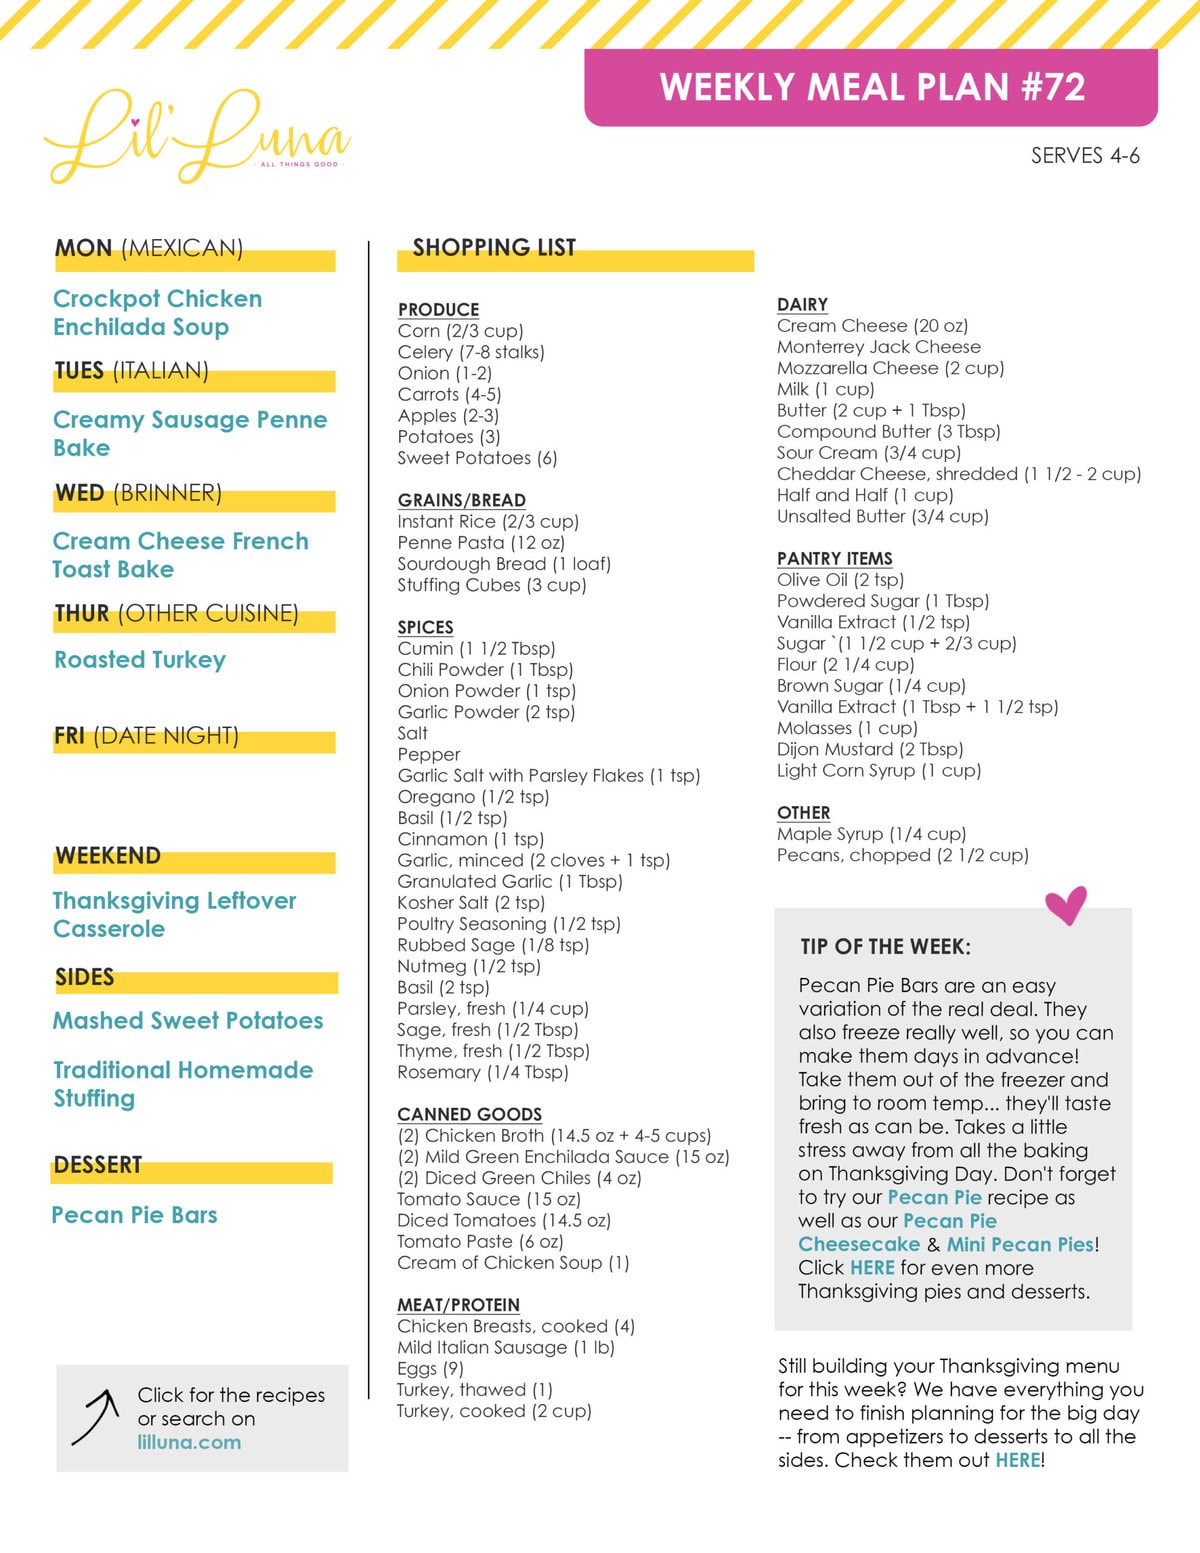 Printable version of Meal Plan #72 with grocery list.